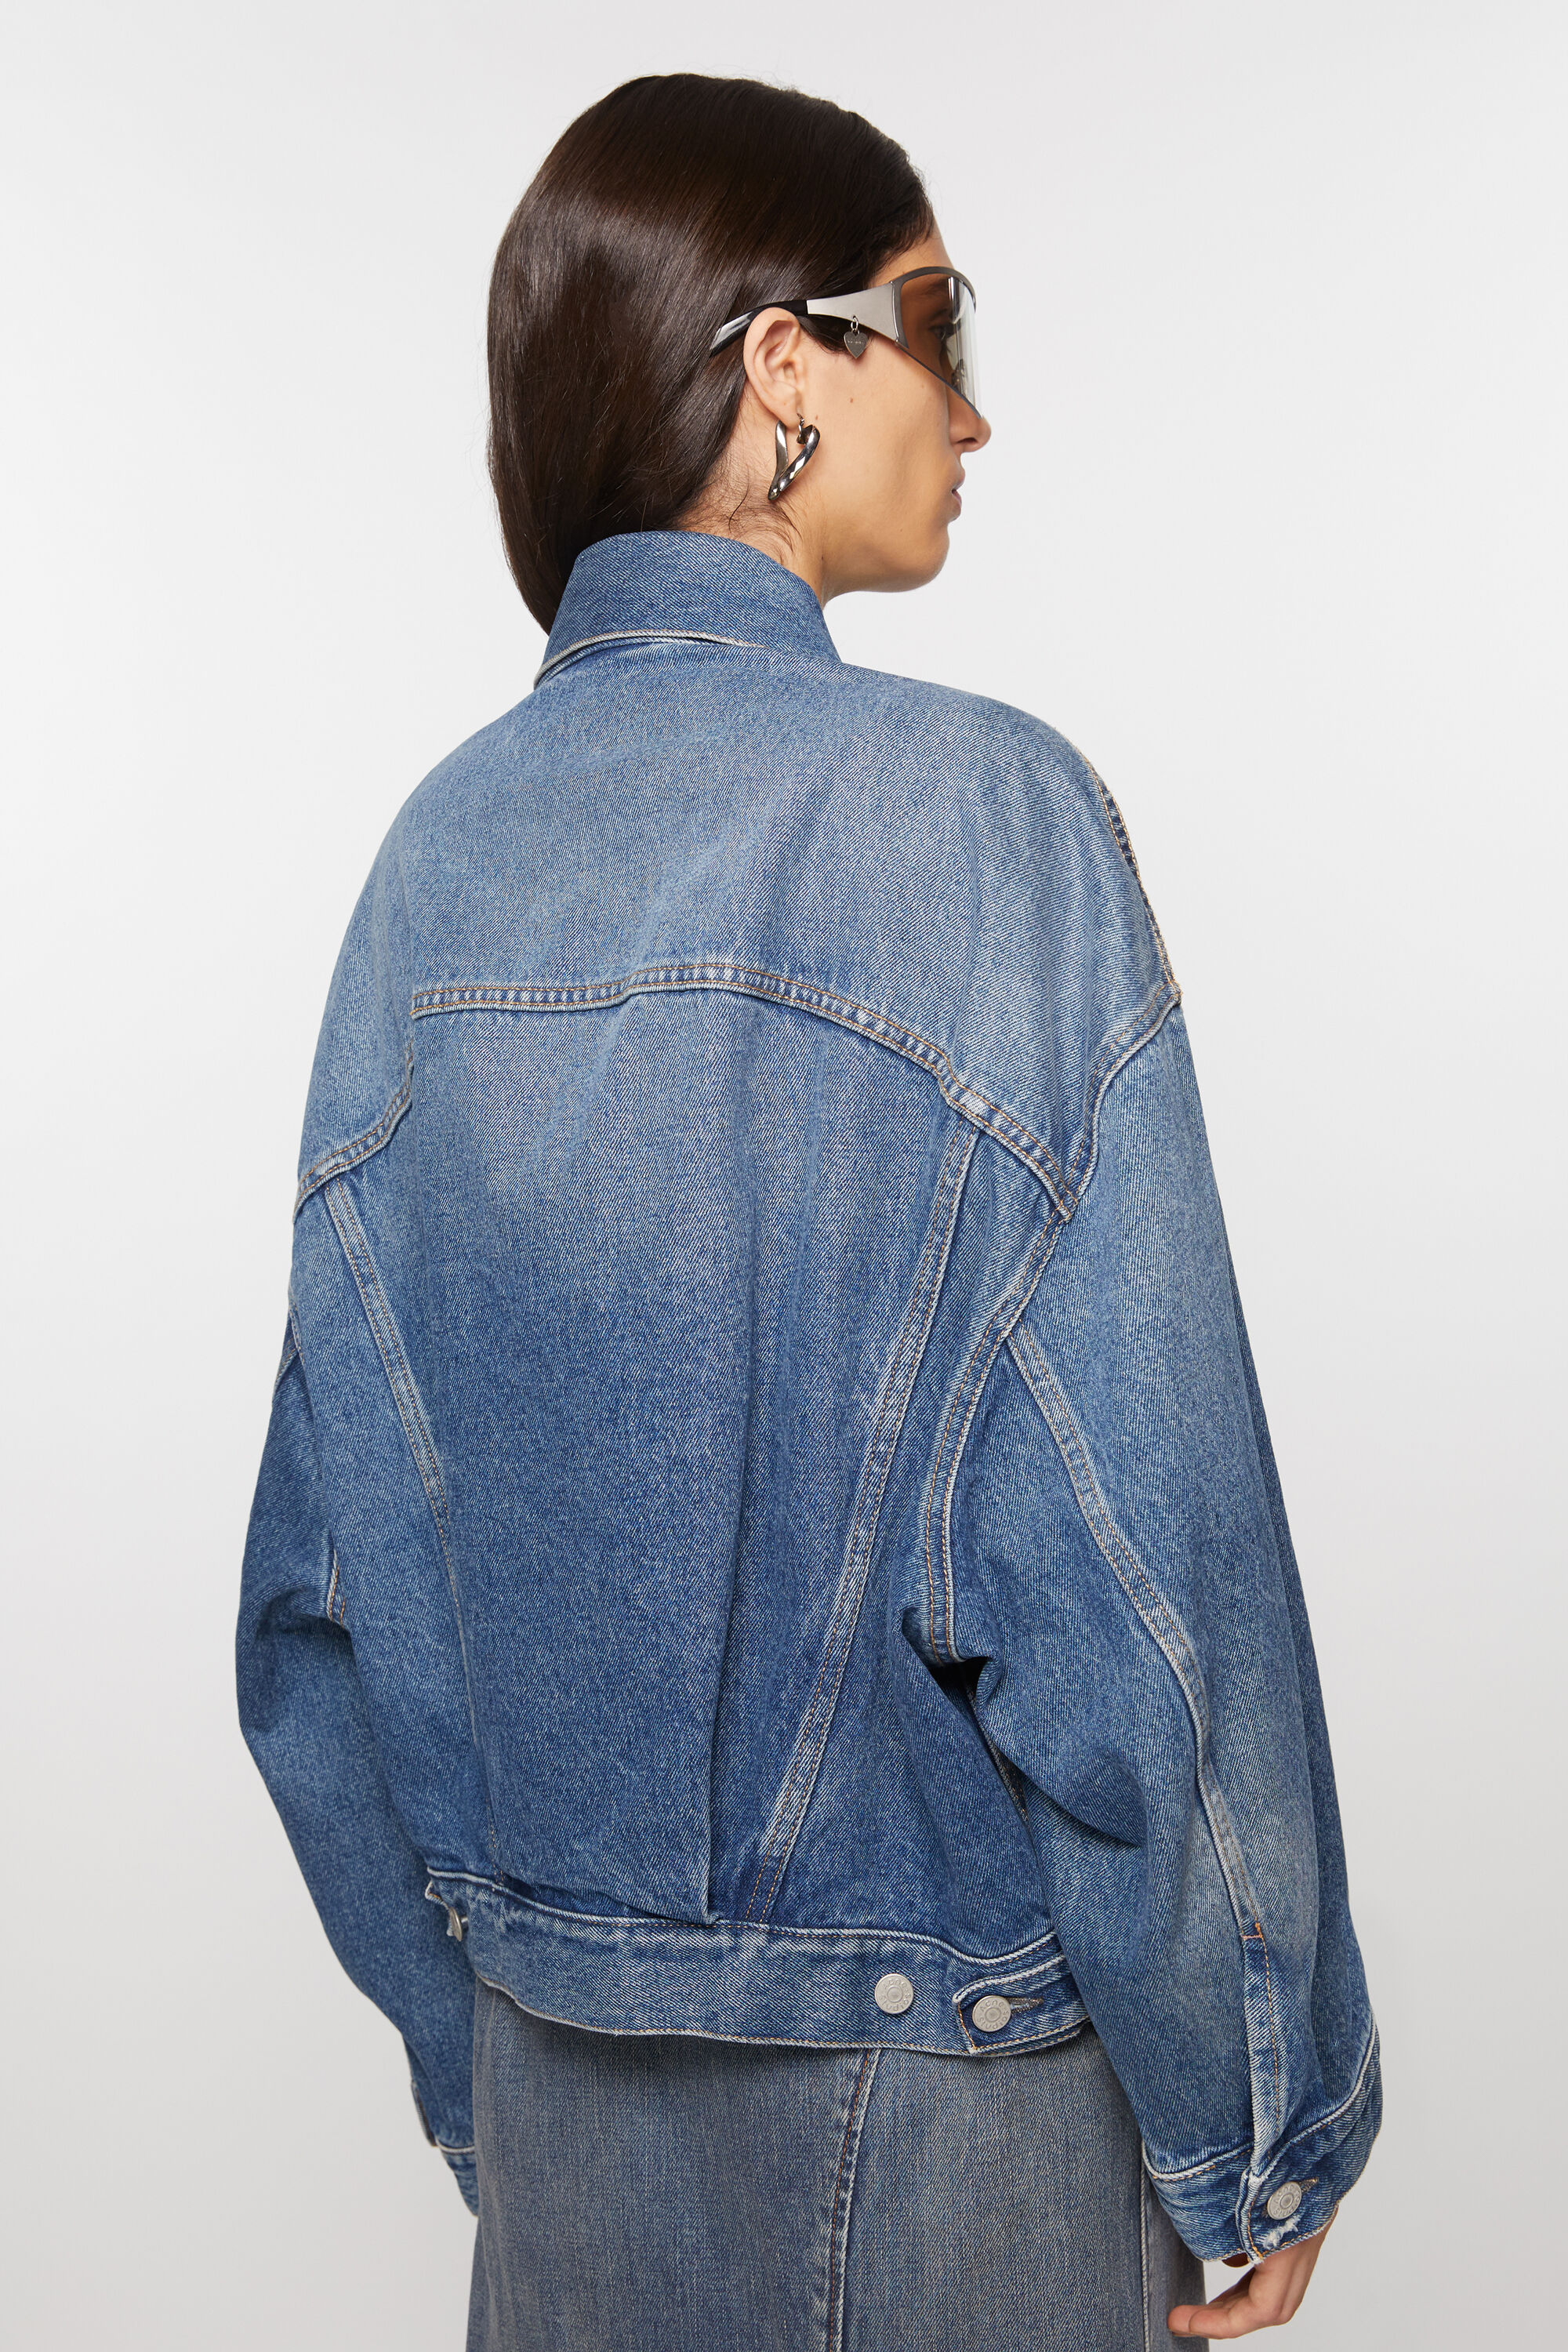 Denim jacket - Relaxed cropped fit